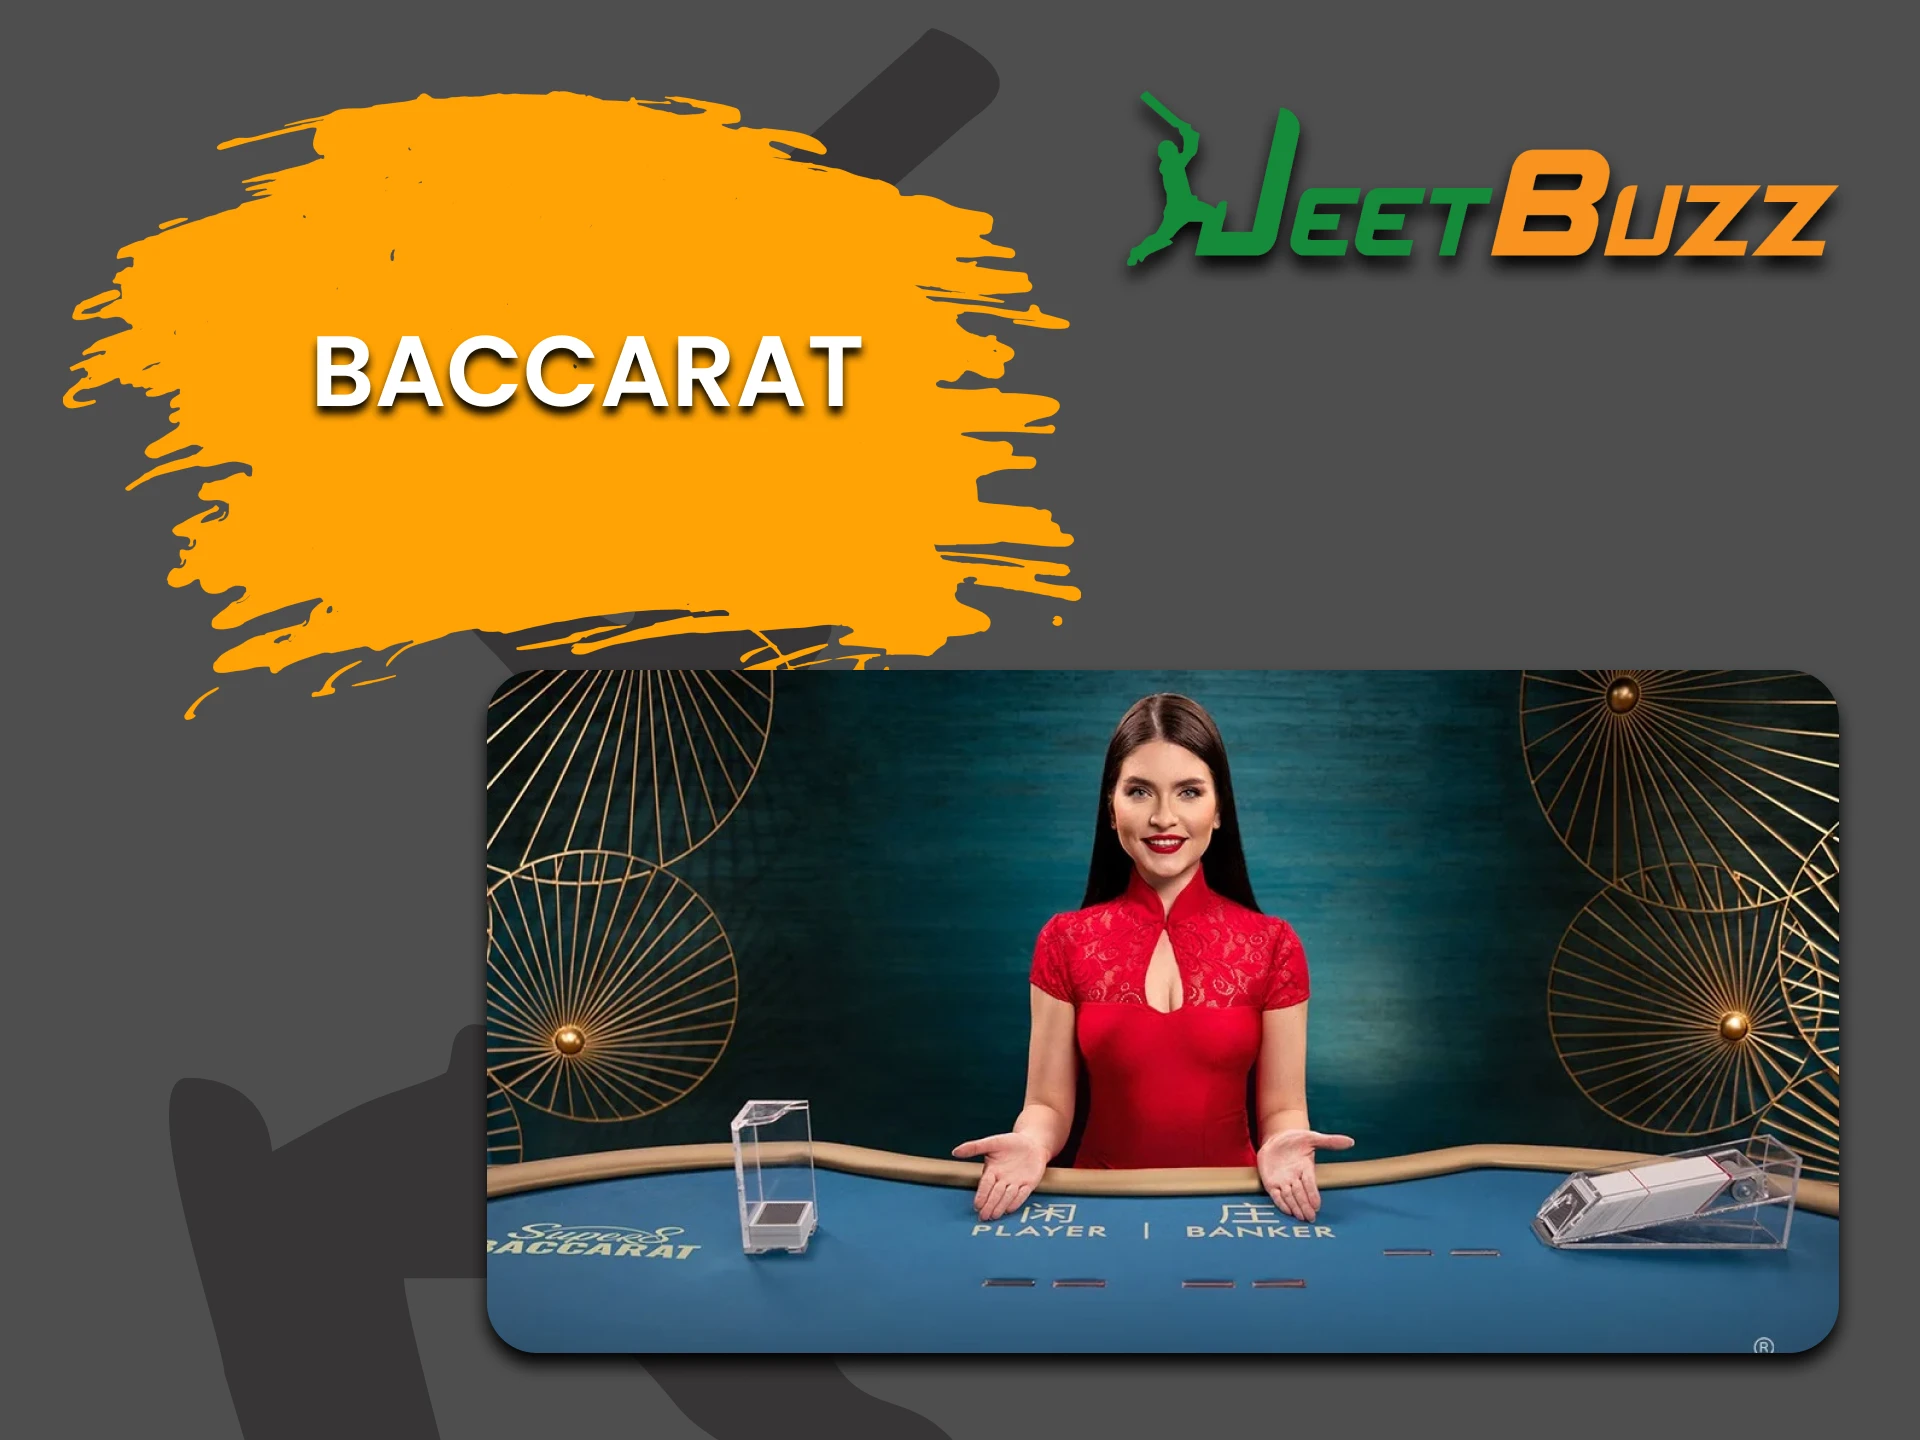 For table games from JeetBuzz, choose Baccarat.